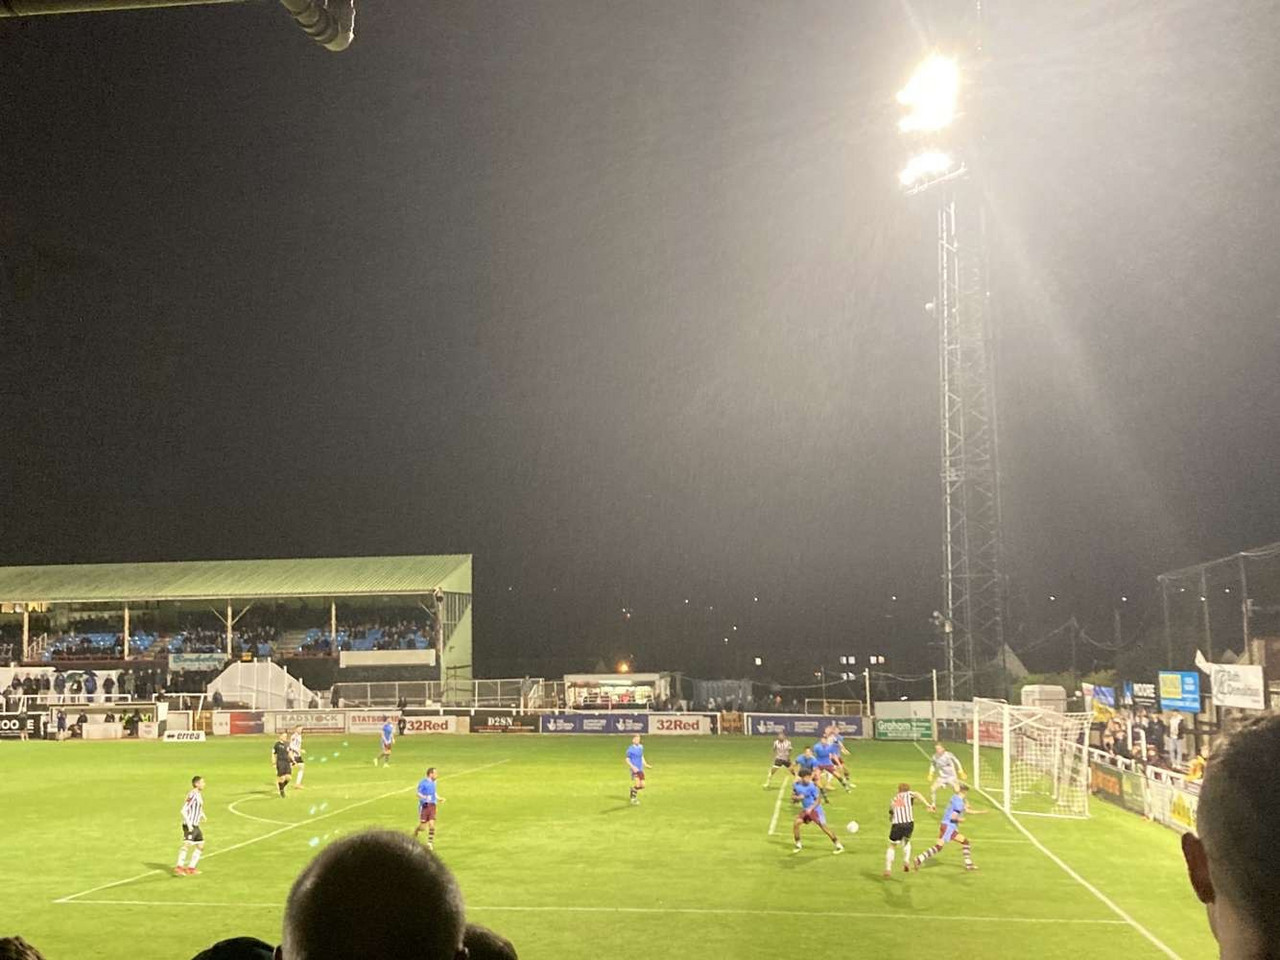 Romans rally to beat The Terras under the lights